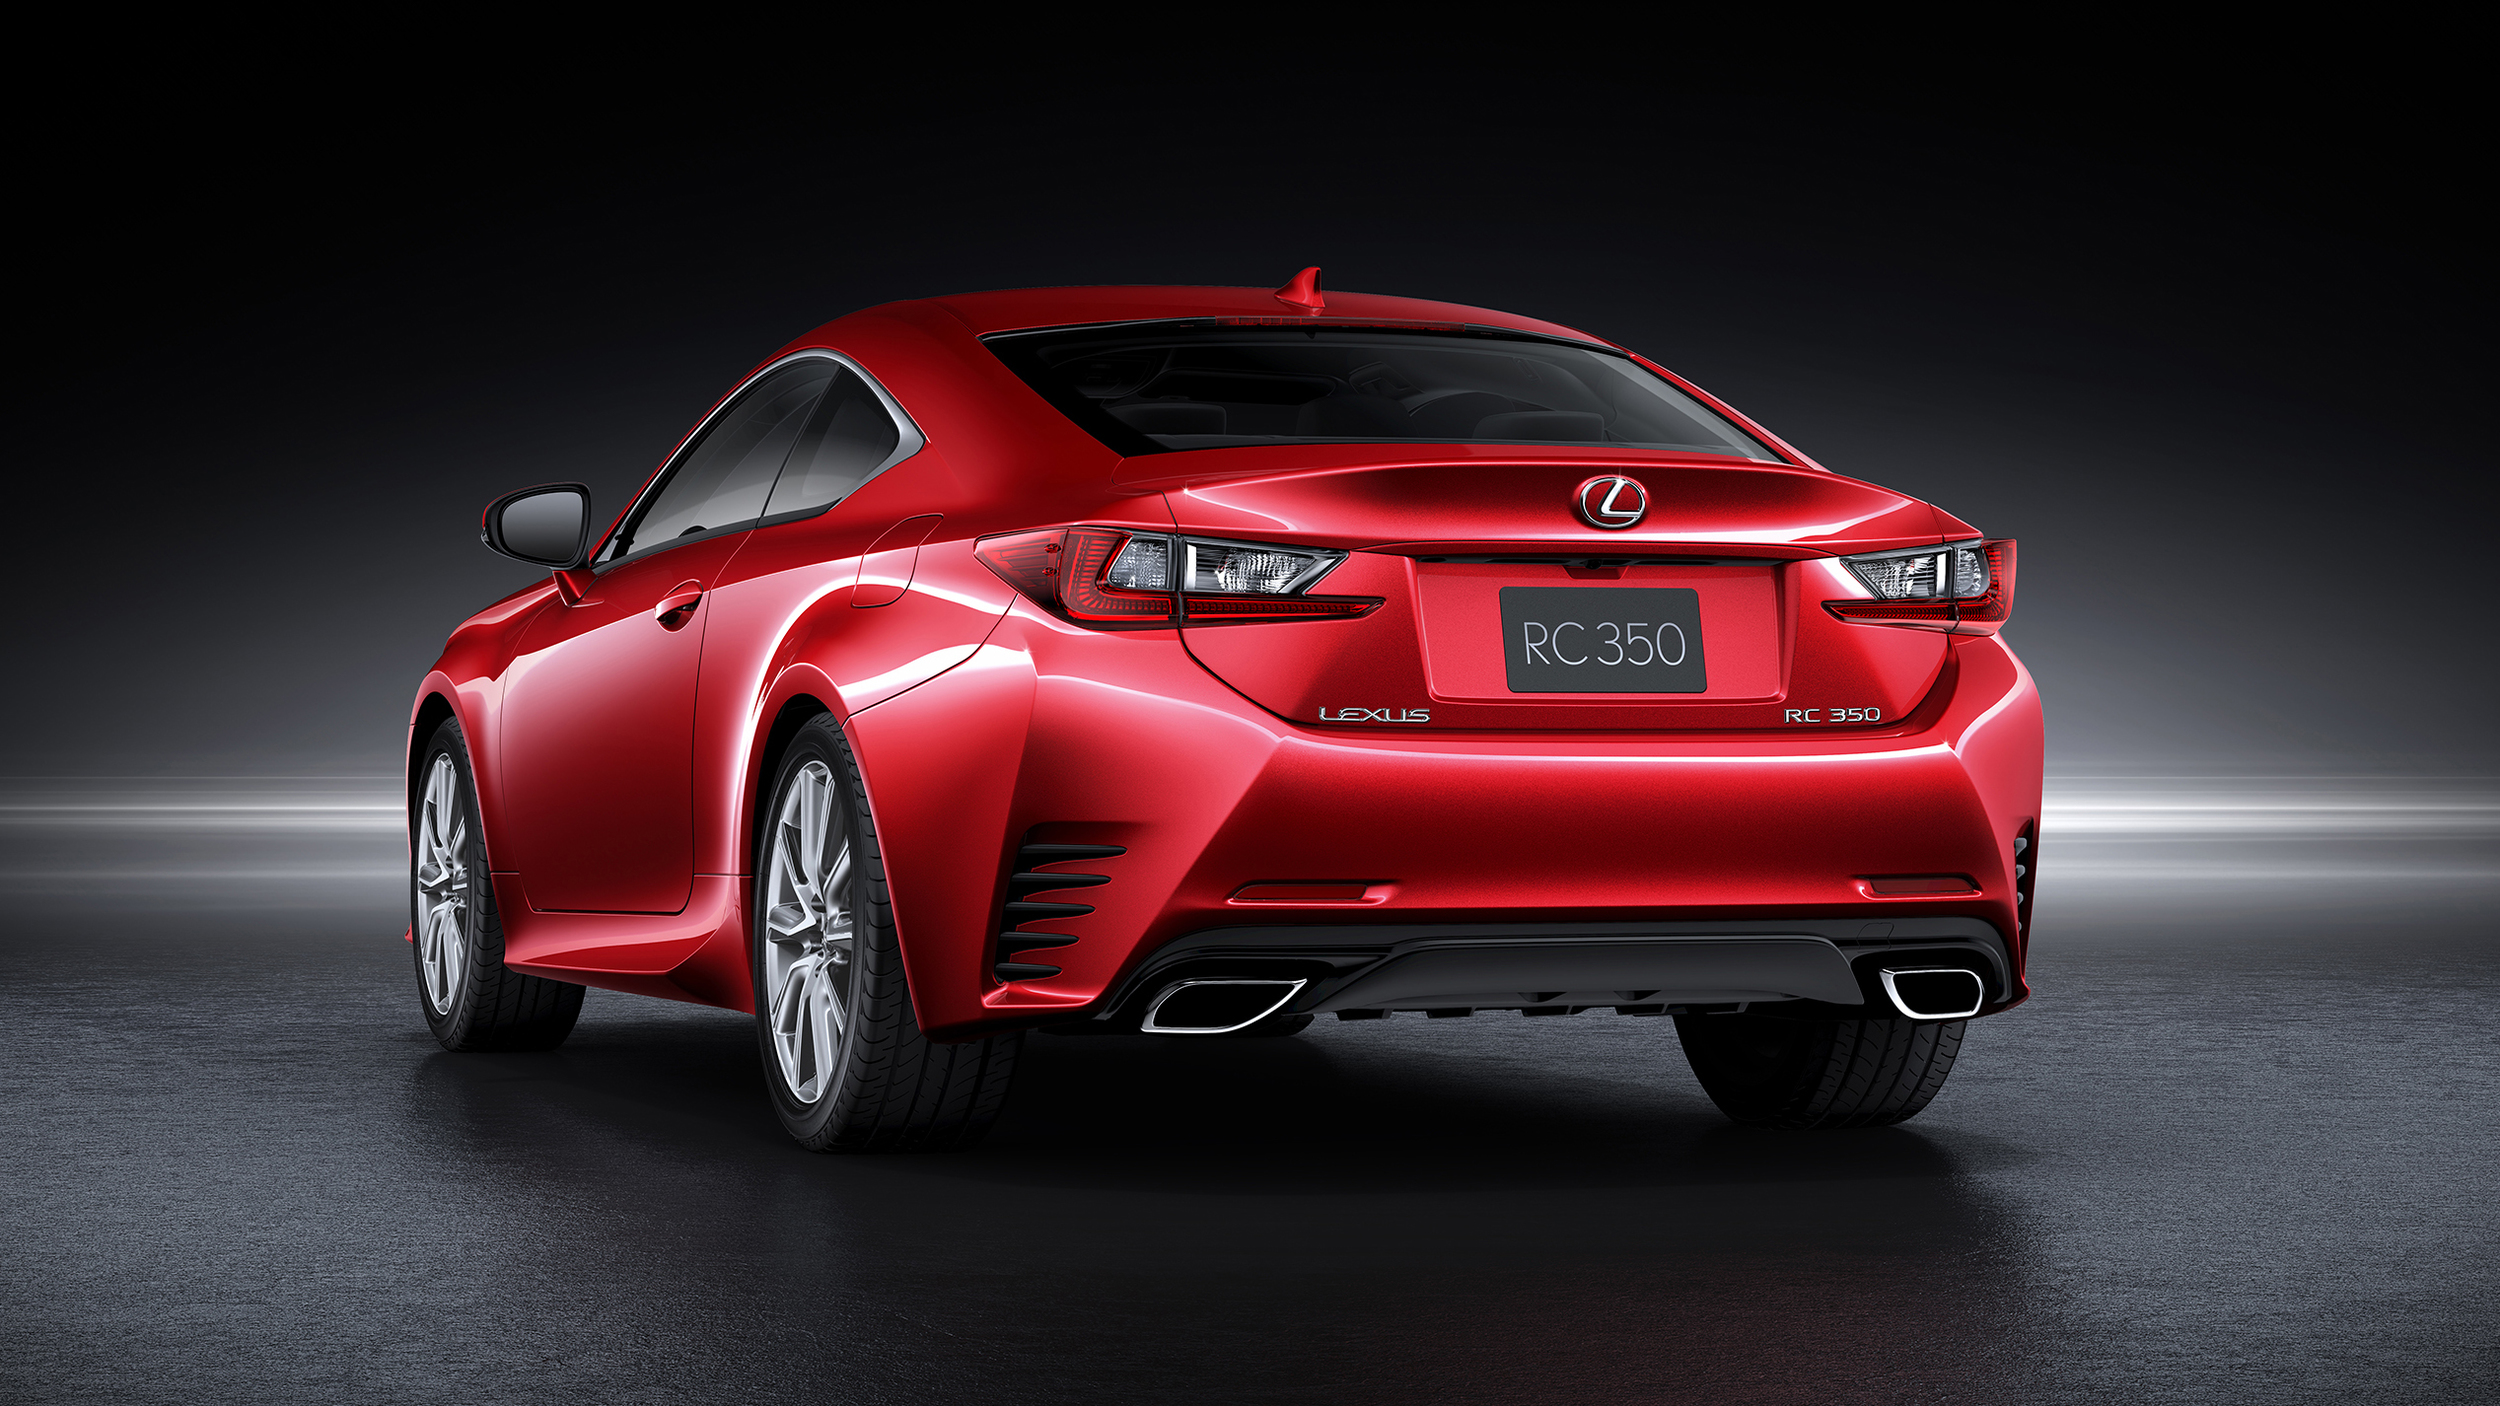 Order books open for all-new Lexus RC coupe